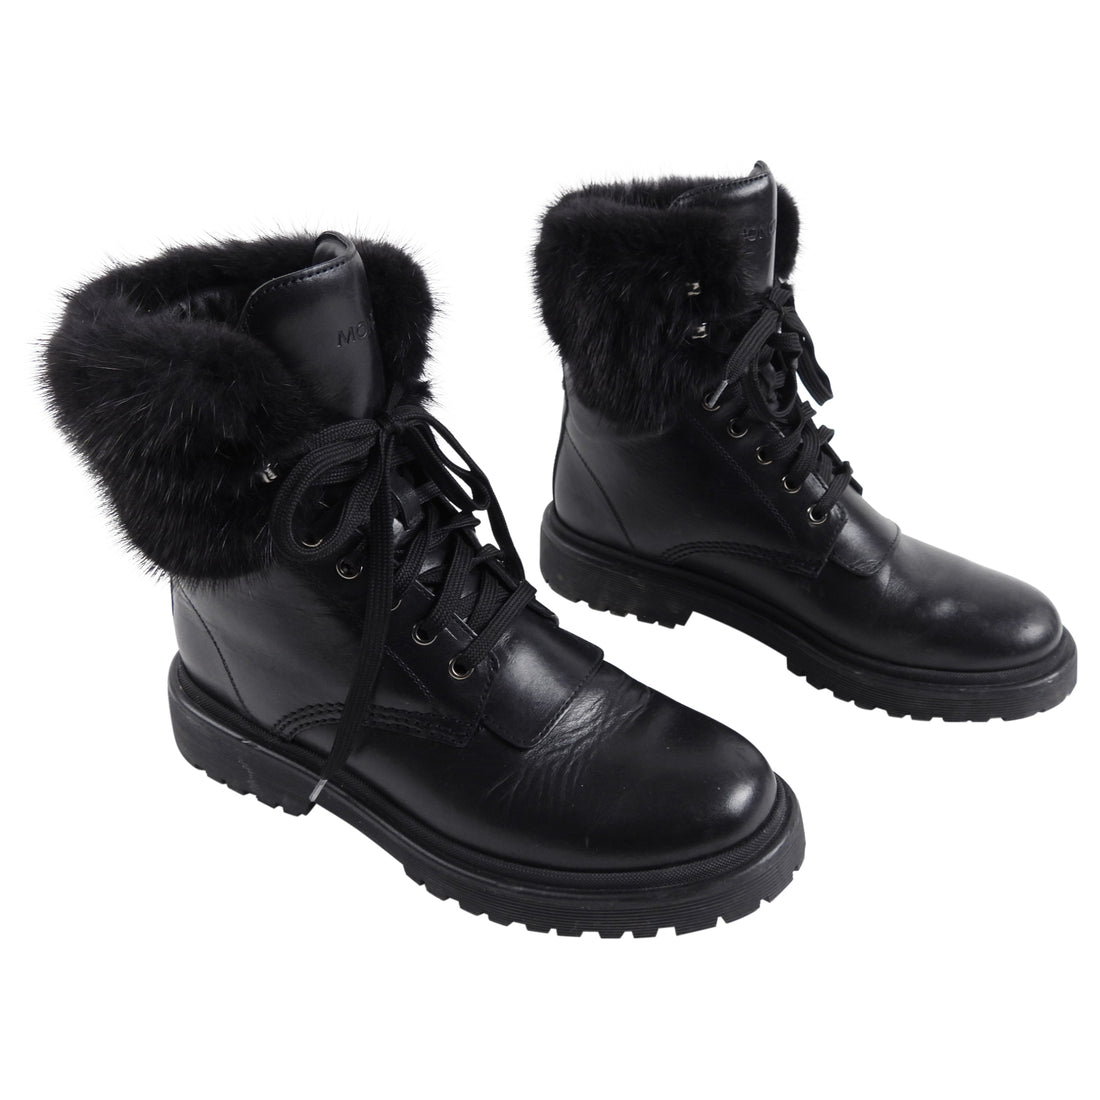 Moncler Black Leather Winter Snow Ankle Booties-38